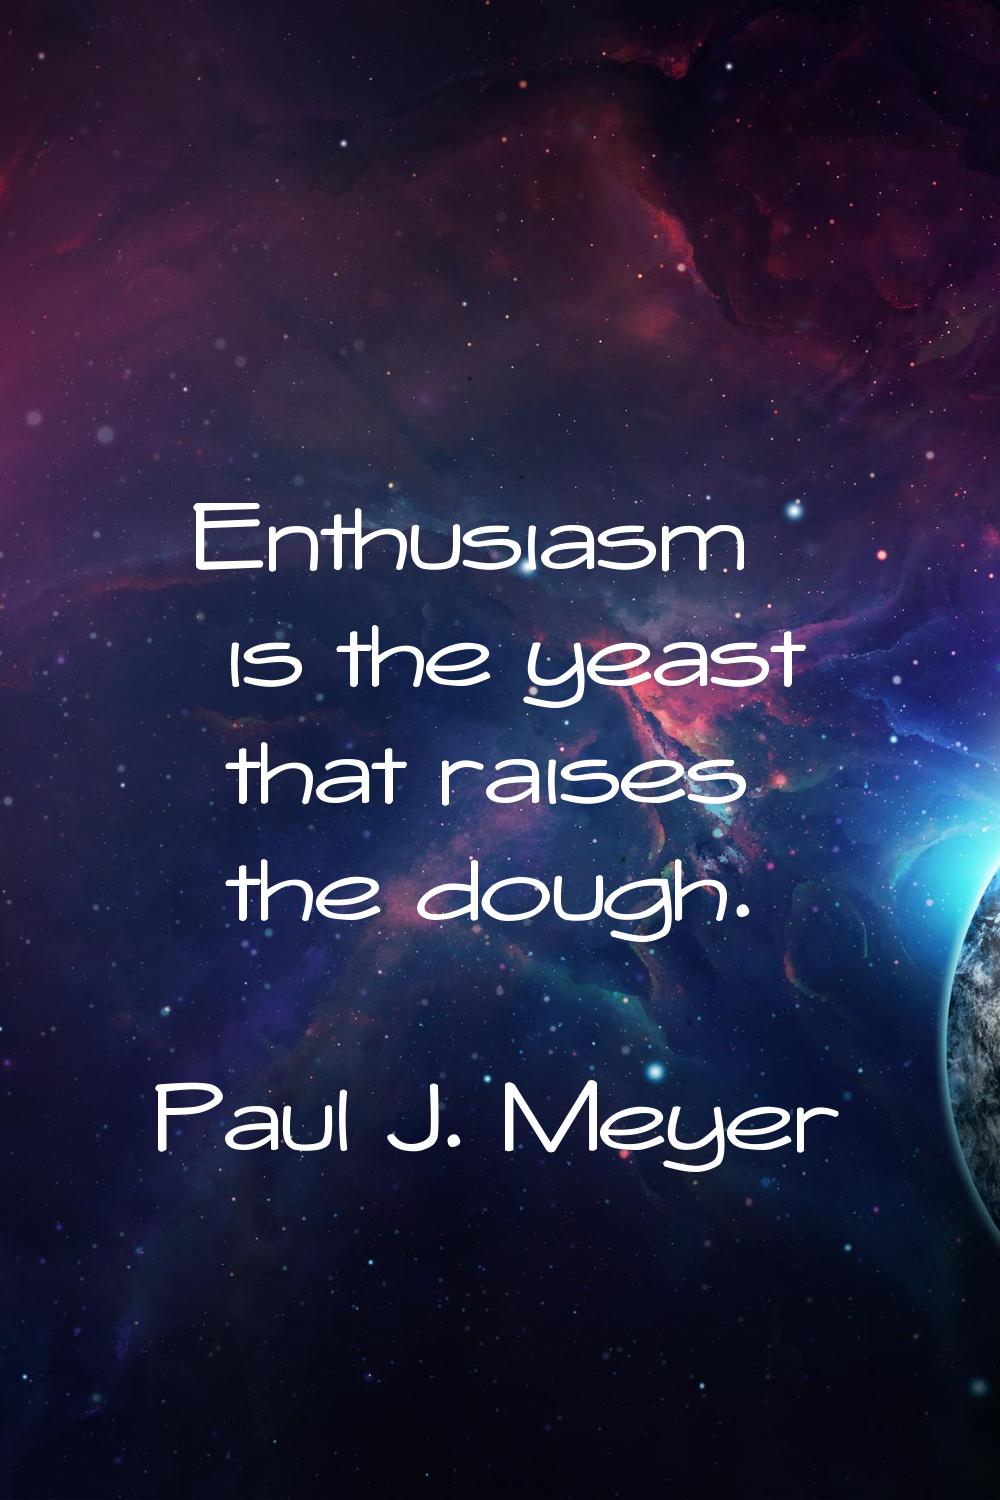 Enthusiasm is the yeast that raises the dough.